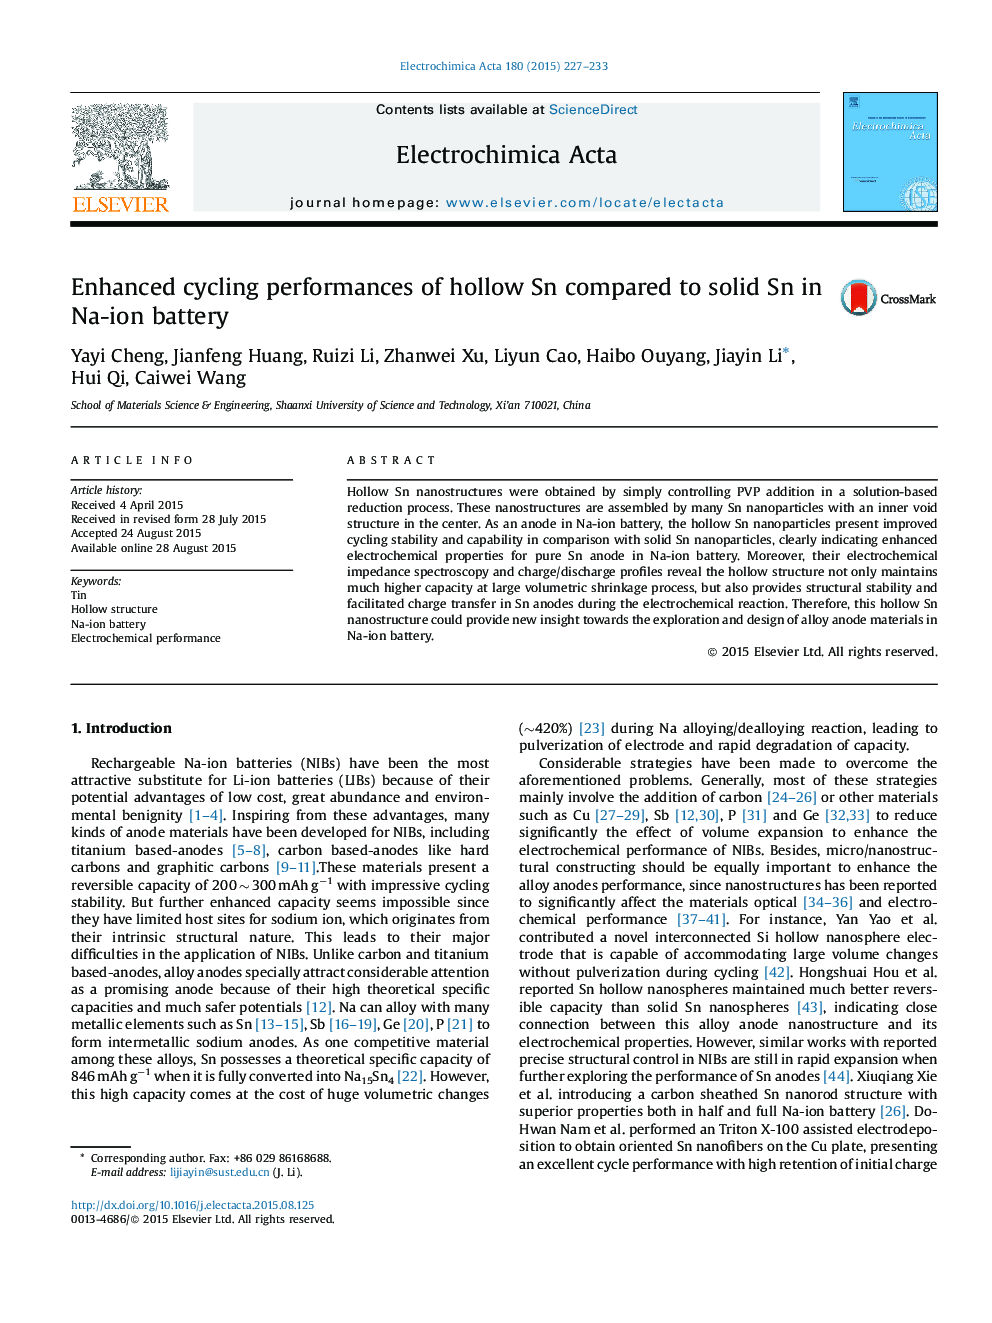 Enhanced cycling performances of hollow Sn compared to solid Sn in Na-ion battery